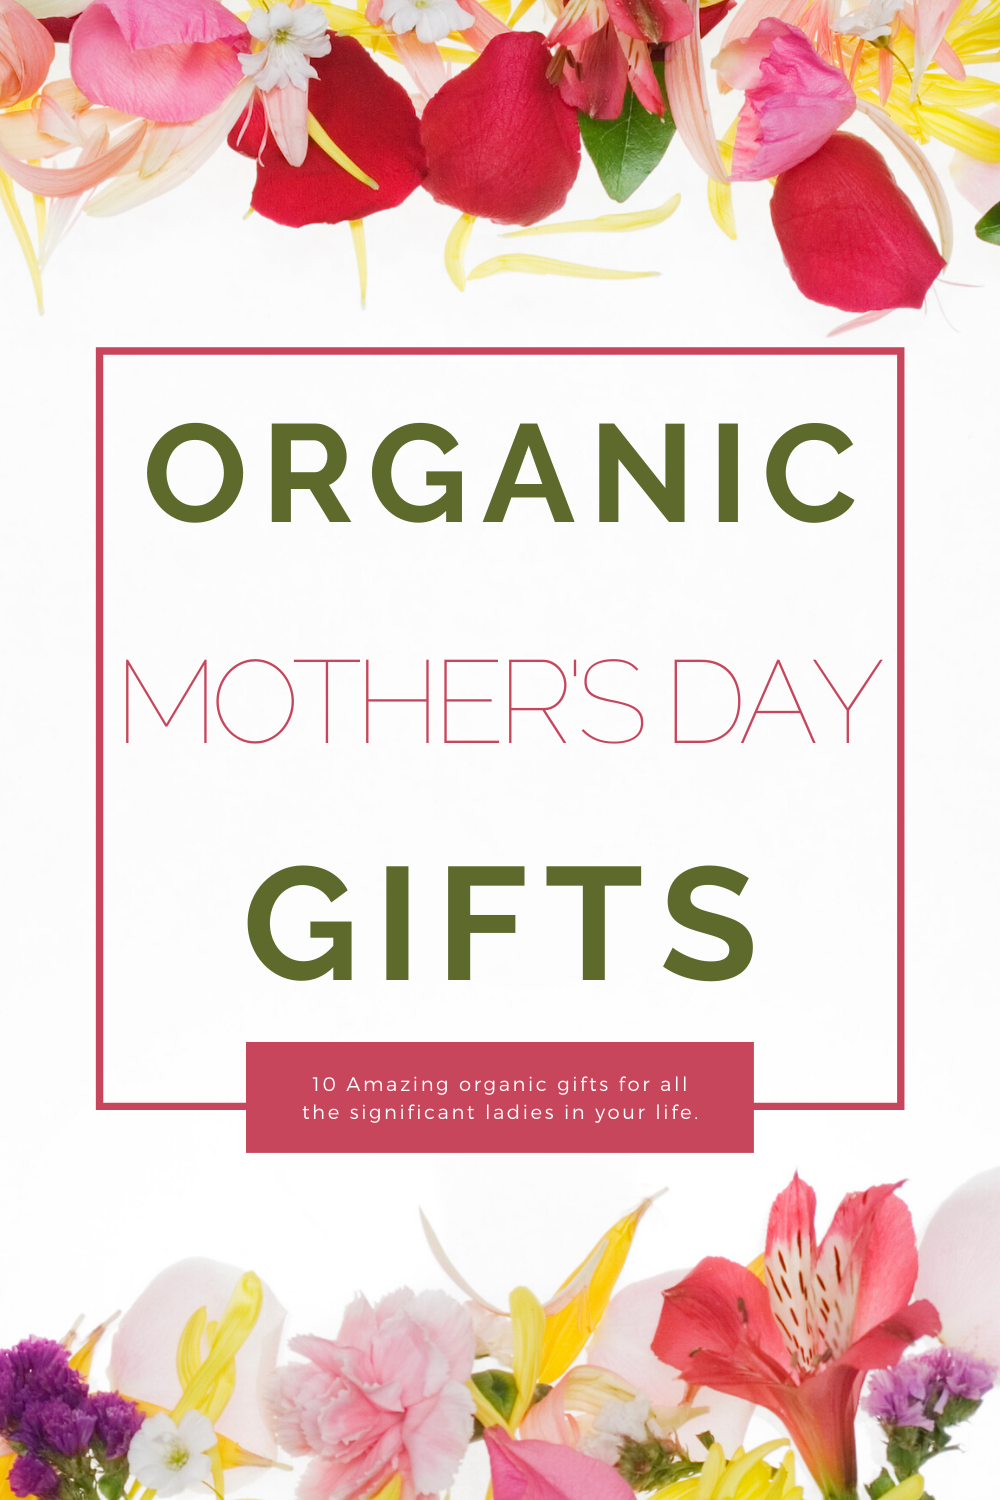 Organic Mother’s Day Gifts. 10 gifts that are all organic that you can get for mom on her special day. #organicgifts #mothersday #organicproducts